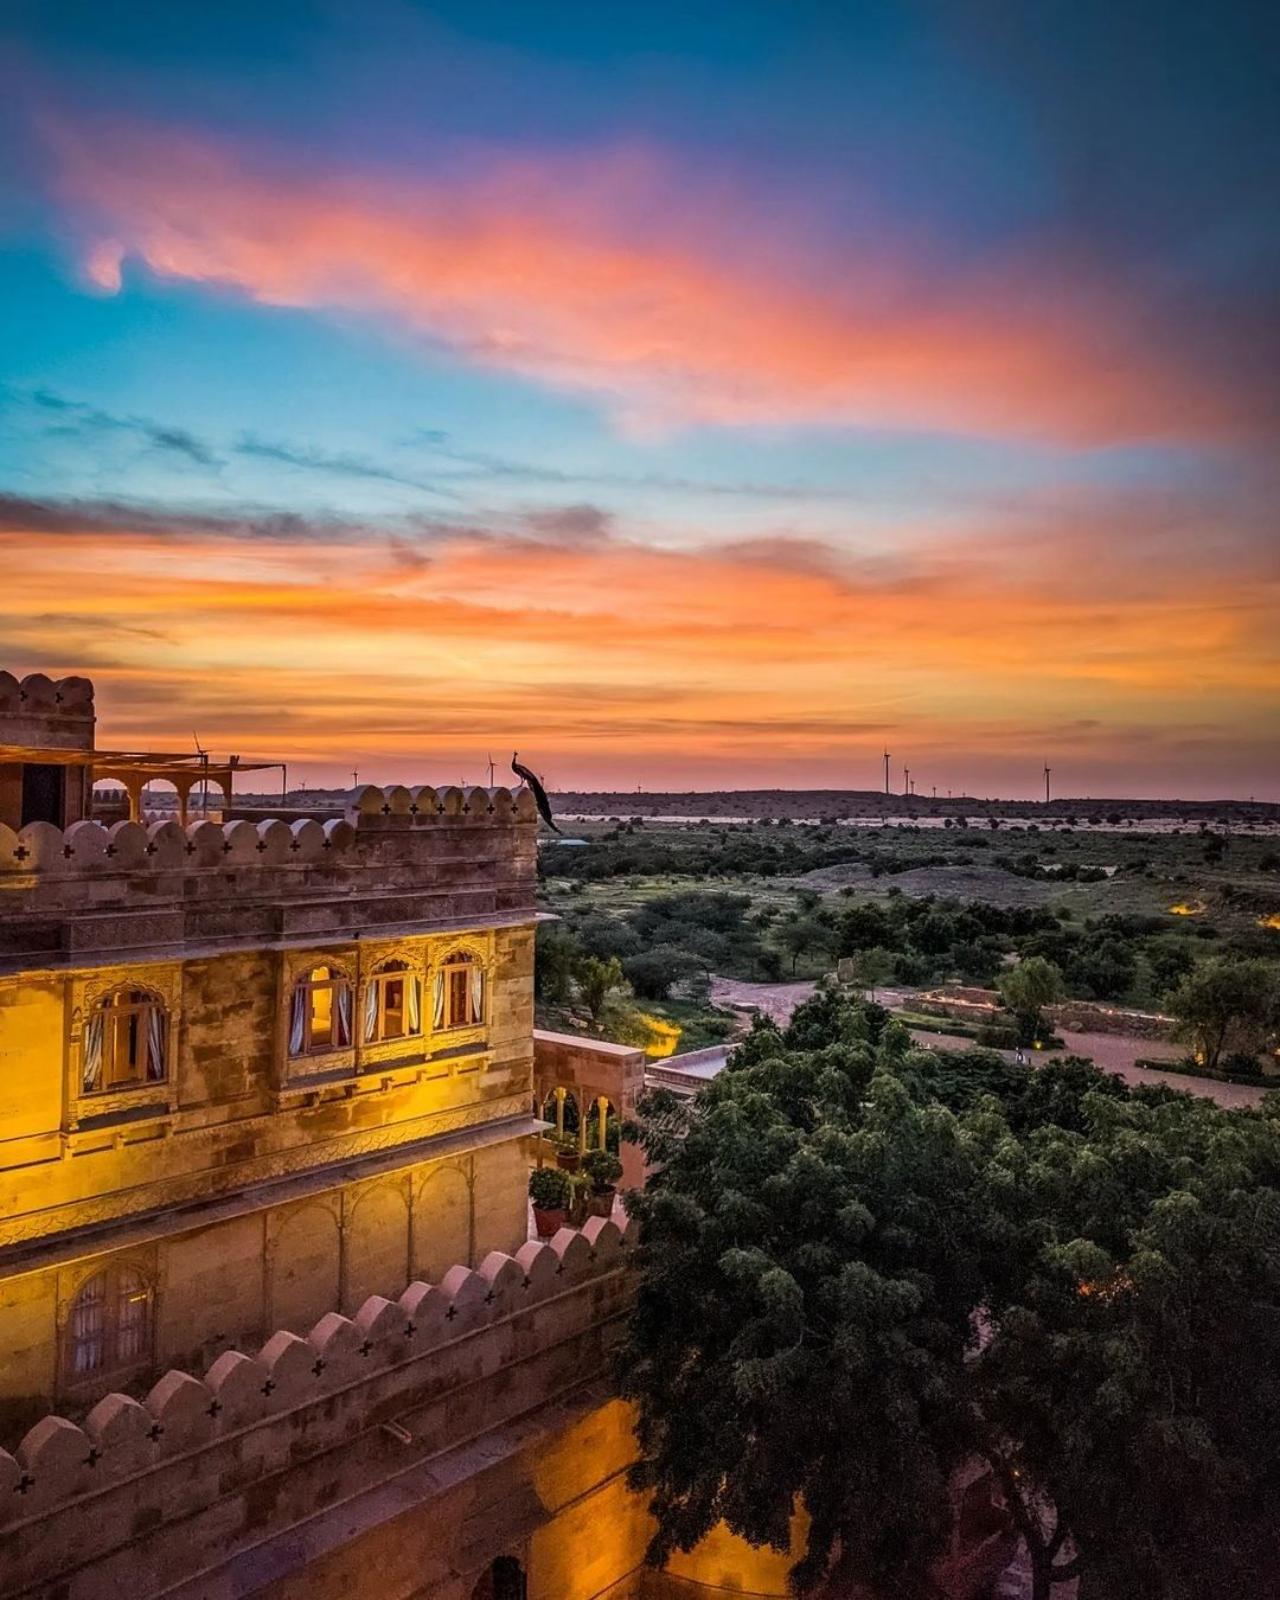 Though built recently, it gives the feel of the 17th century with views of the Thar Desert from its own infinity pool, peacocks for company and each stone of the sandstone edifice handcrafted and hand-chiselled to reflect the indigenous desert culture